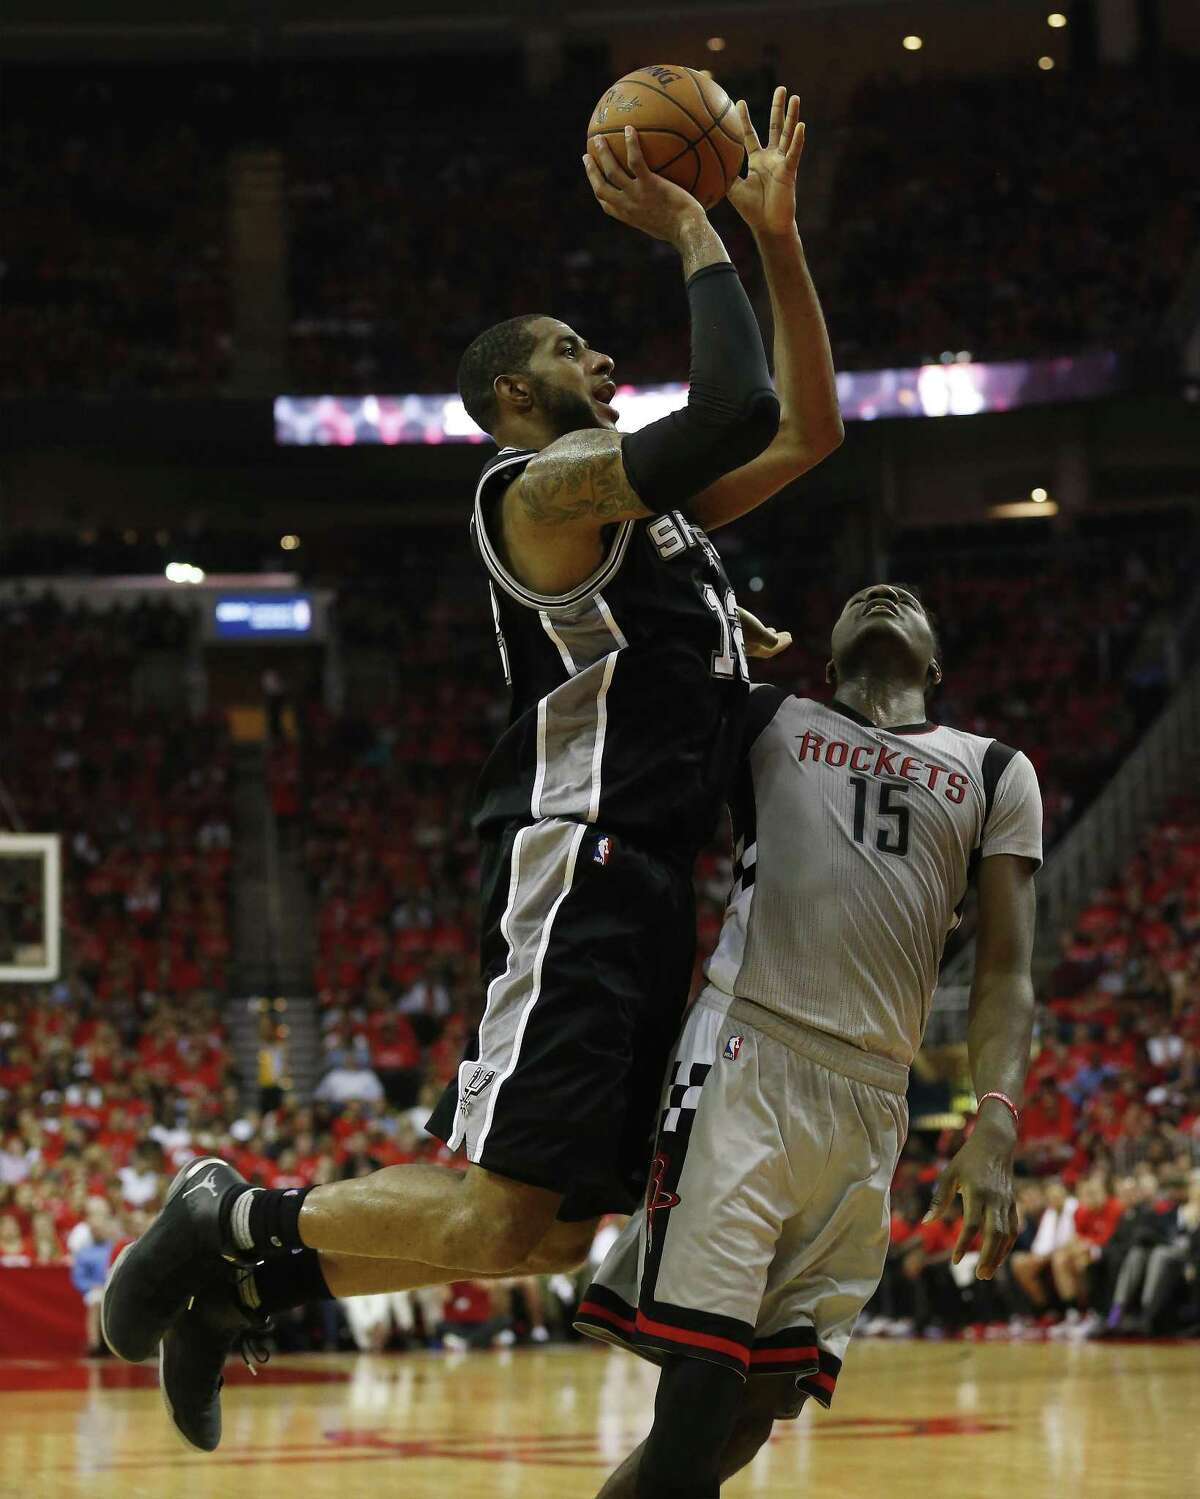 Spurs' LaMarcus Aldridge (12) attempts a shot against Houston Rockets' Clint Capela (15) in Game 6 of the Western Conference semifinals at the Toyota Center on Thursday, May 11, 2017. (Kin Man Hui/San Antonio Express-News)